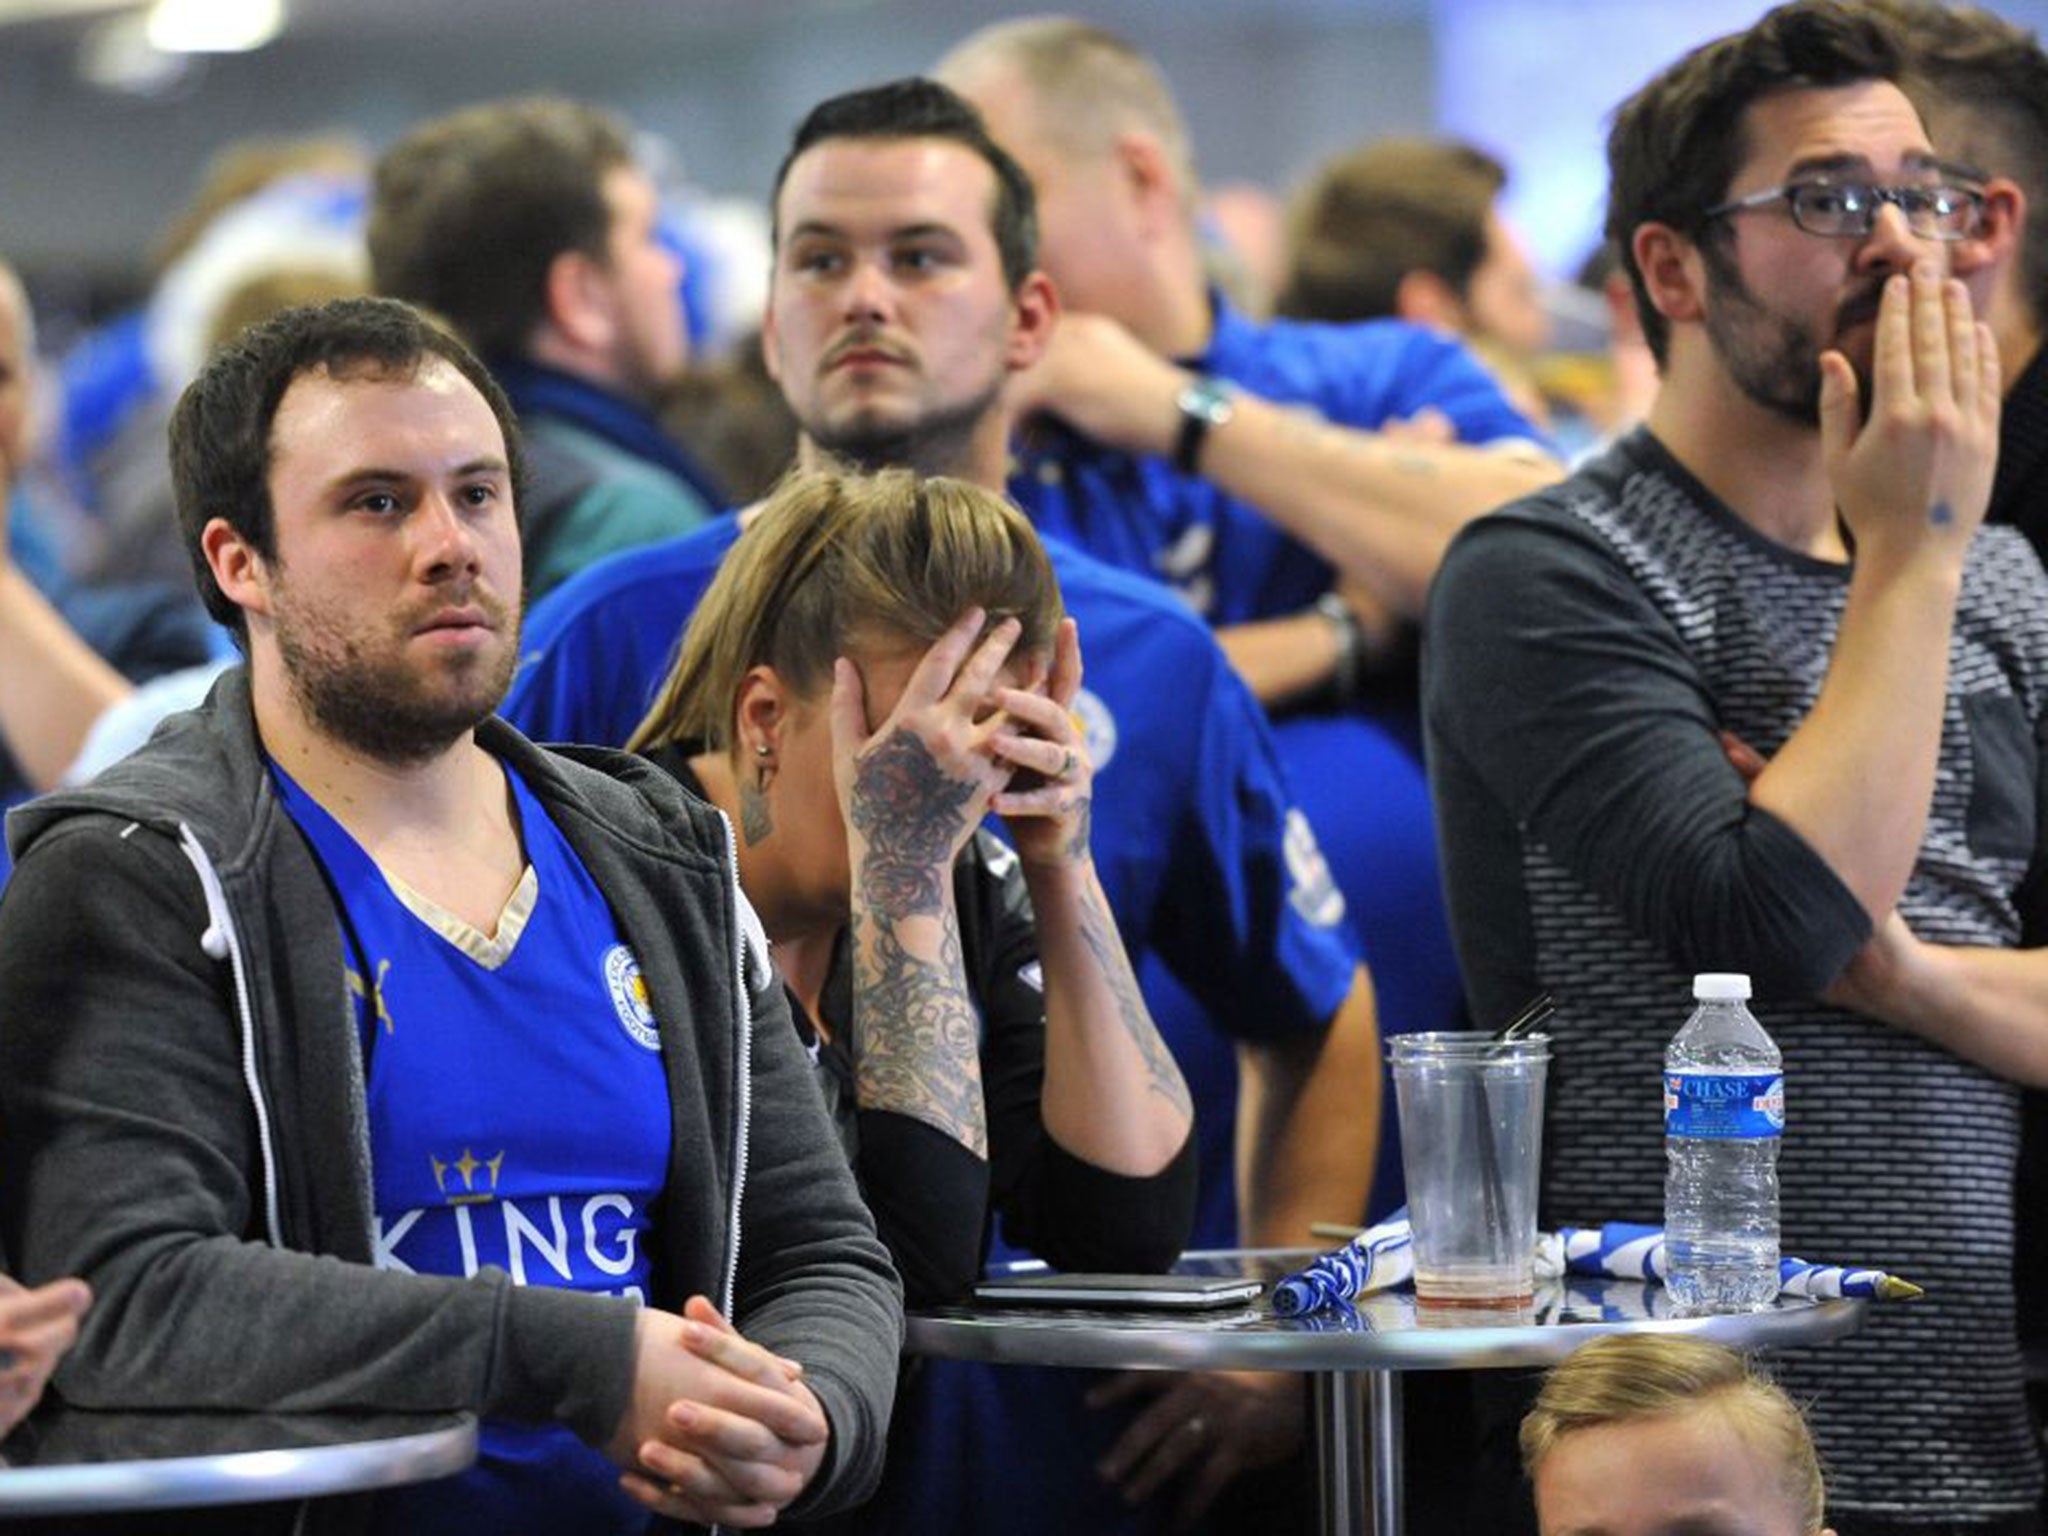 Leicester City fans gather to watch their match against Manchester United